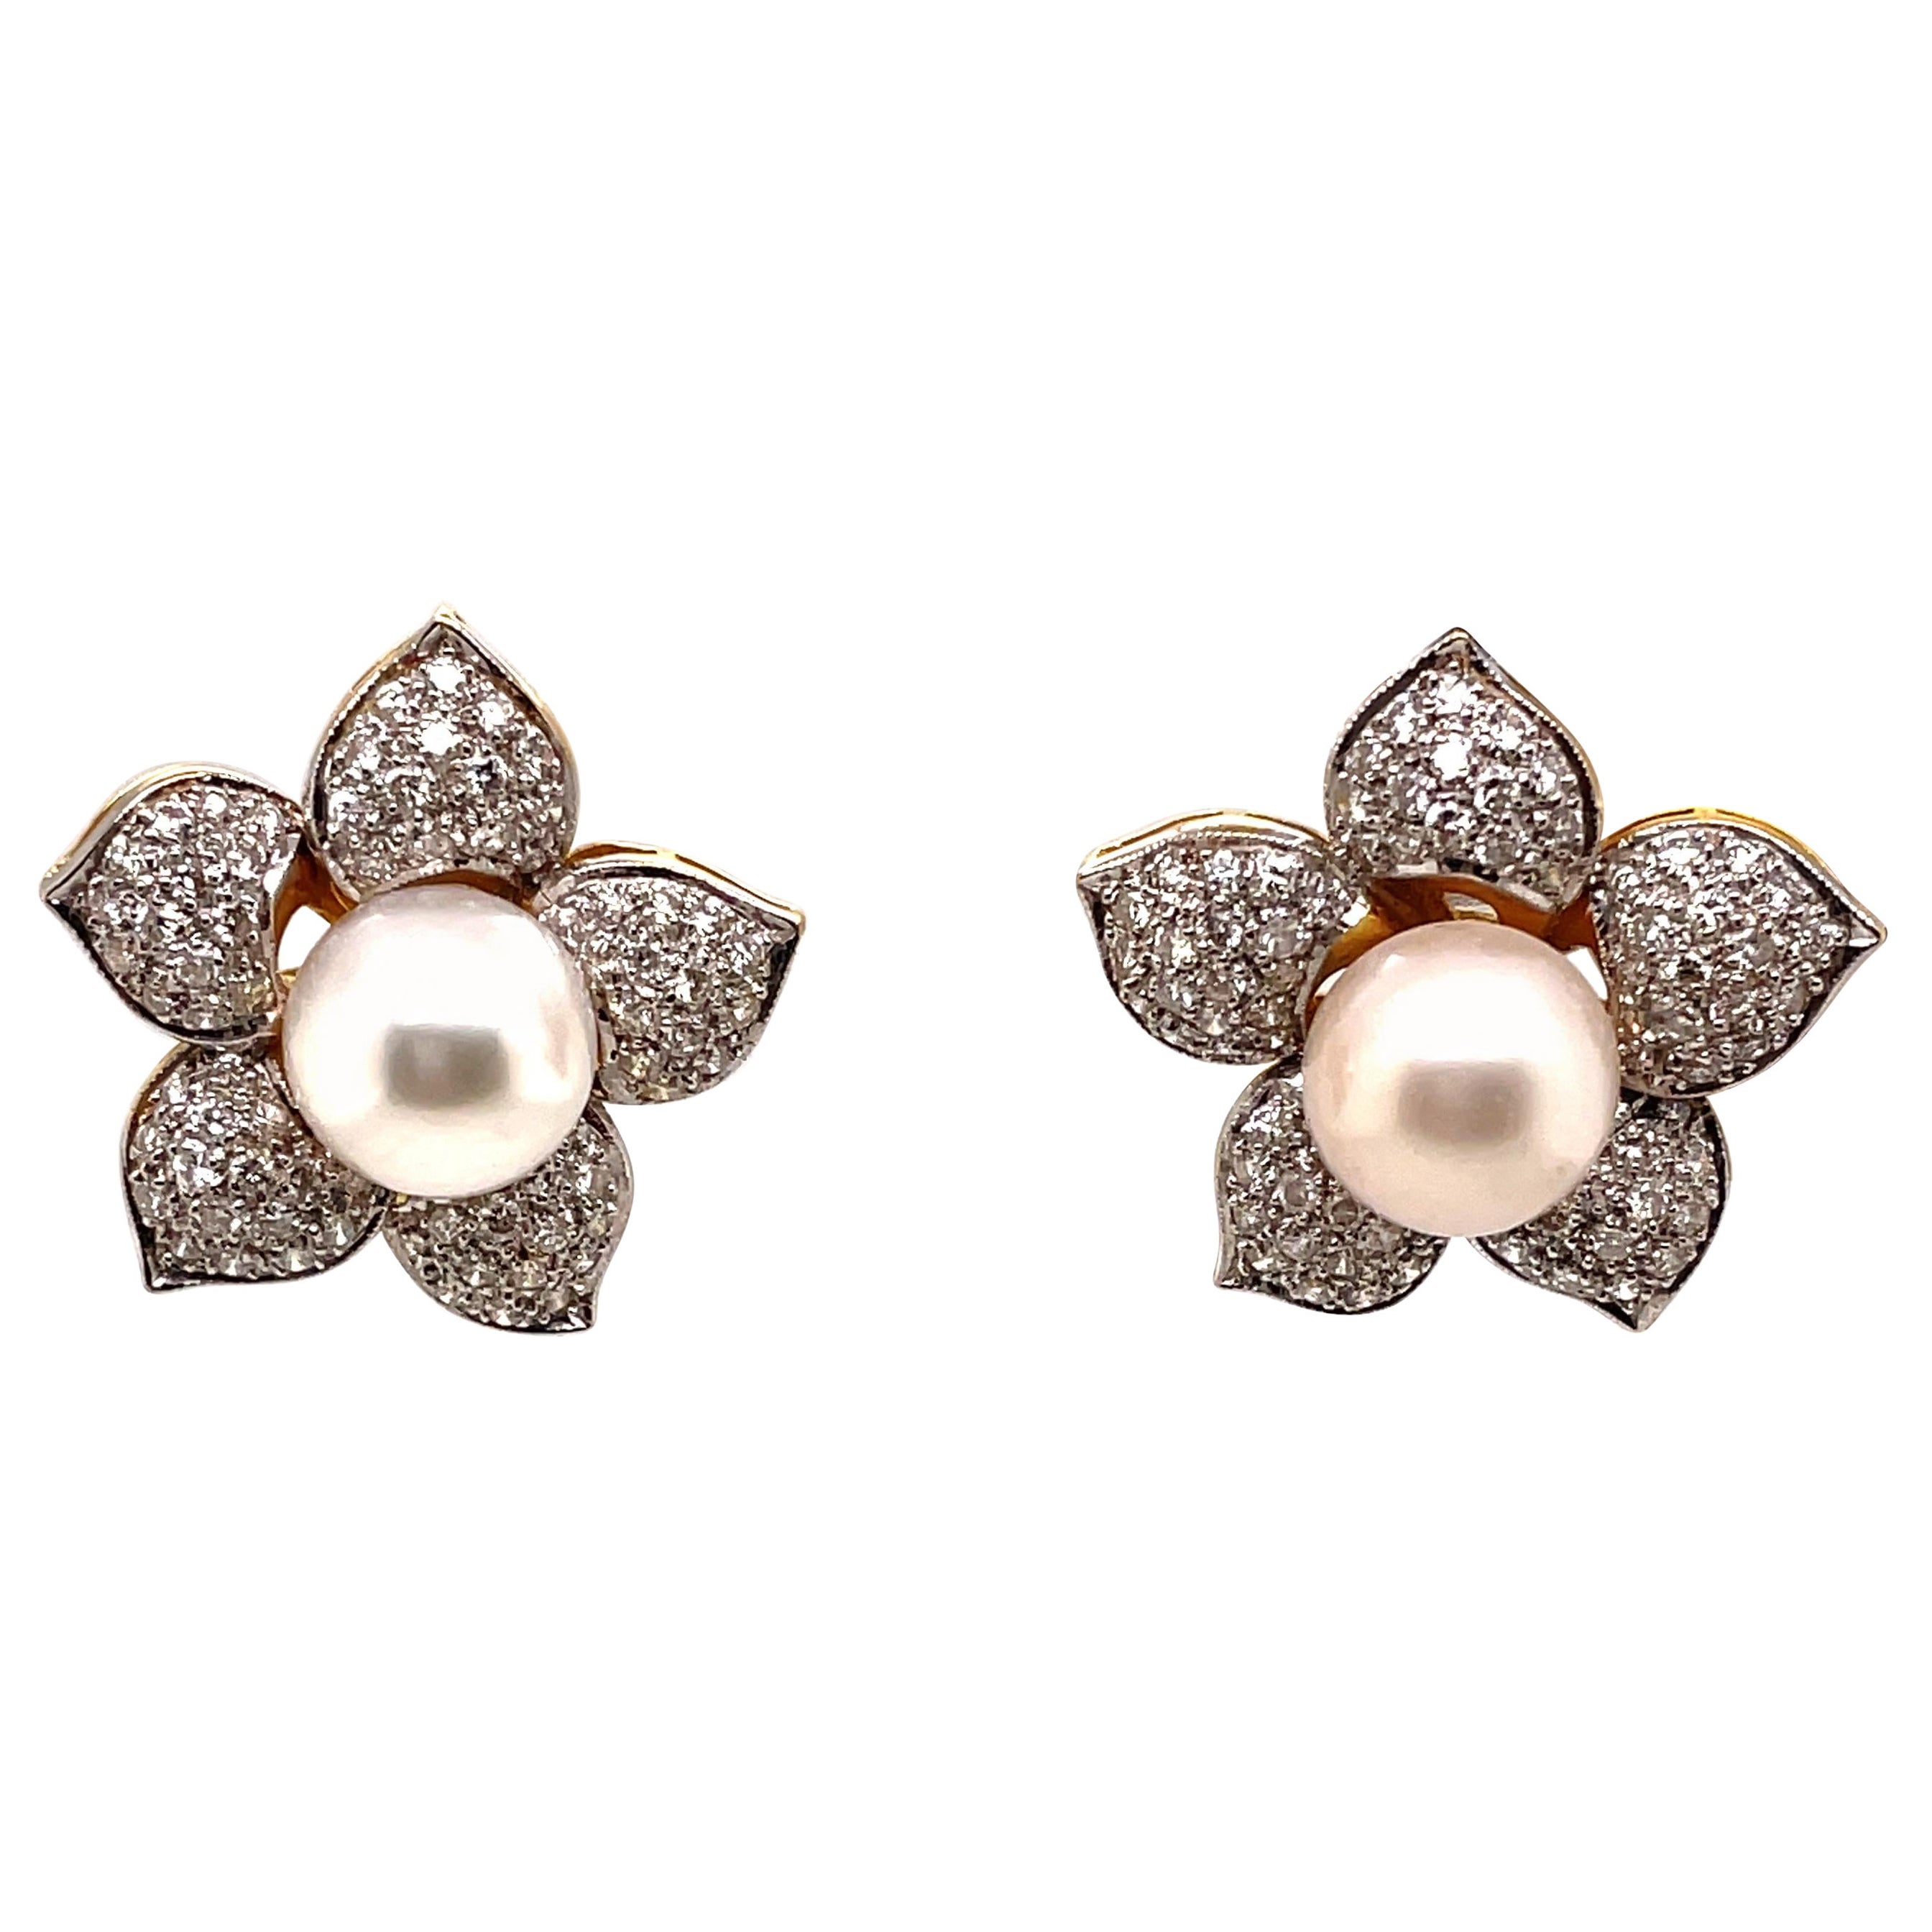 2ct Diamonds and Pearls Floral Stud Earrings White and Yellow Gold For Sale